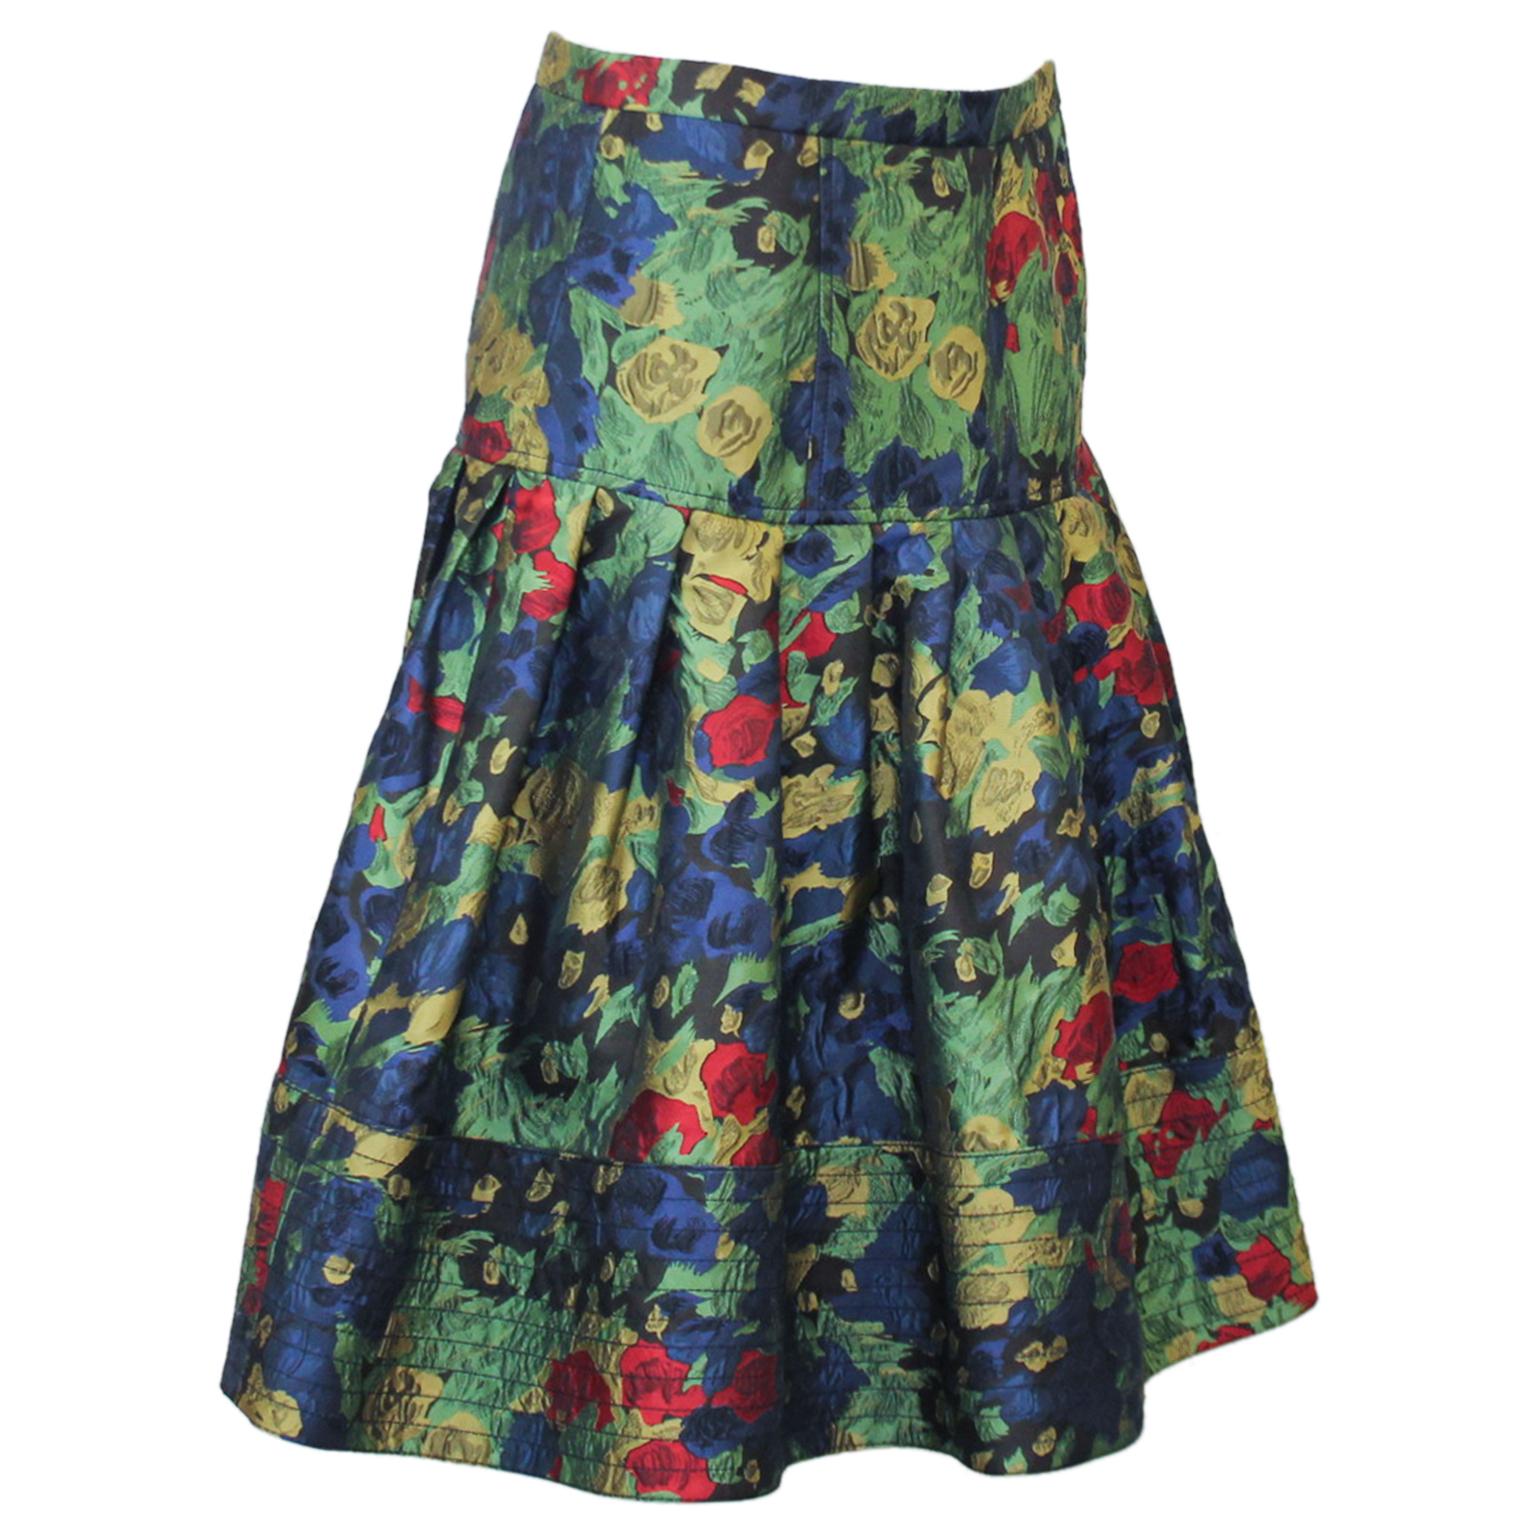 Late 1990s Oscar de la Renta flared skirt with a vibrant floral pattern on a black background. The luscious silk brocade fabric gives the skirt its amazing shape. Fitted through the hips with a pleated drop waist and finished with a black